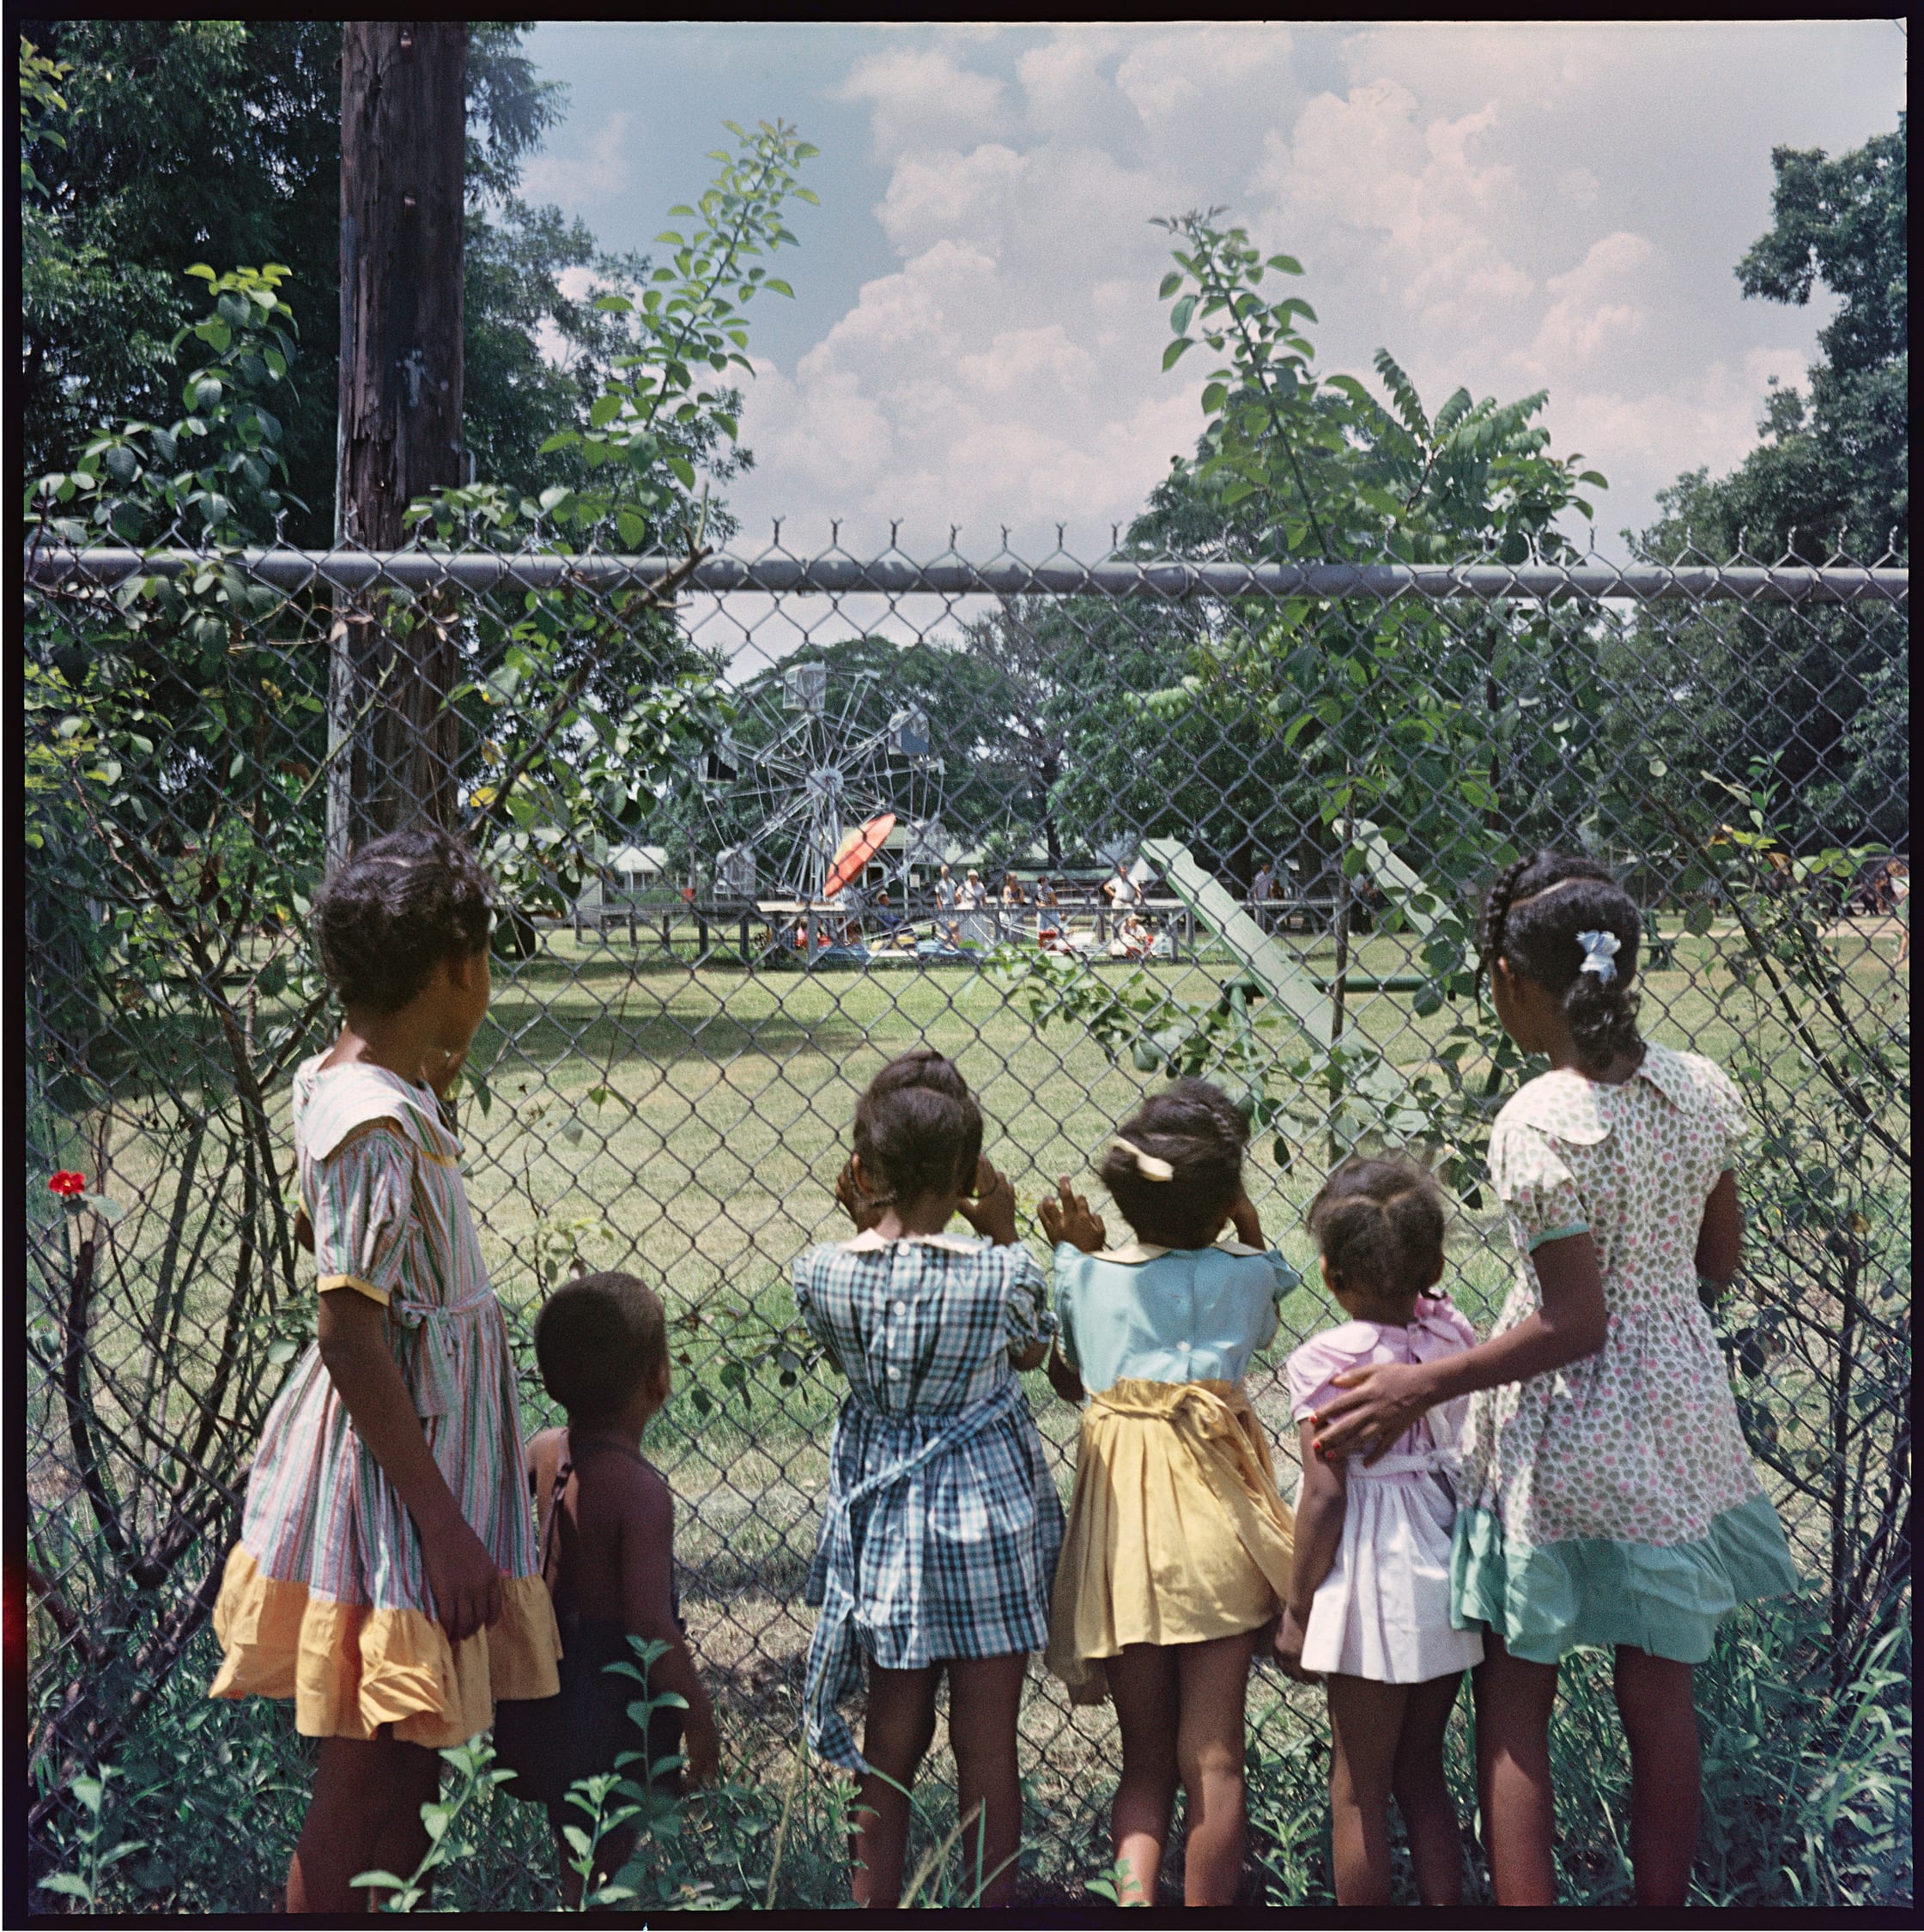  Gordon Parks (American, 1912–2006), Outside Looking In, Mobile, Alabama, 1956, courtesy of and copyright The Gordon Parks Foundation.